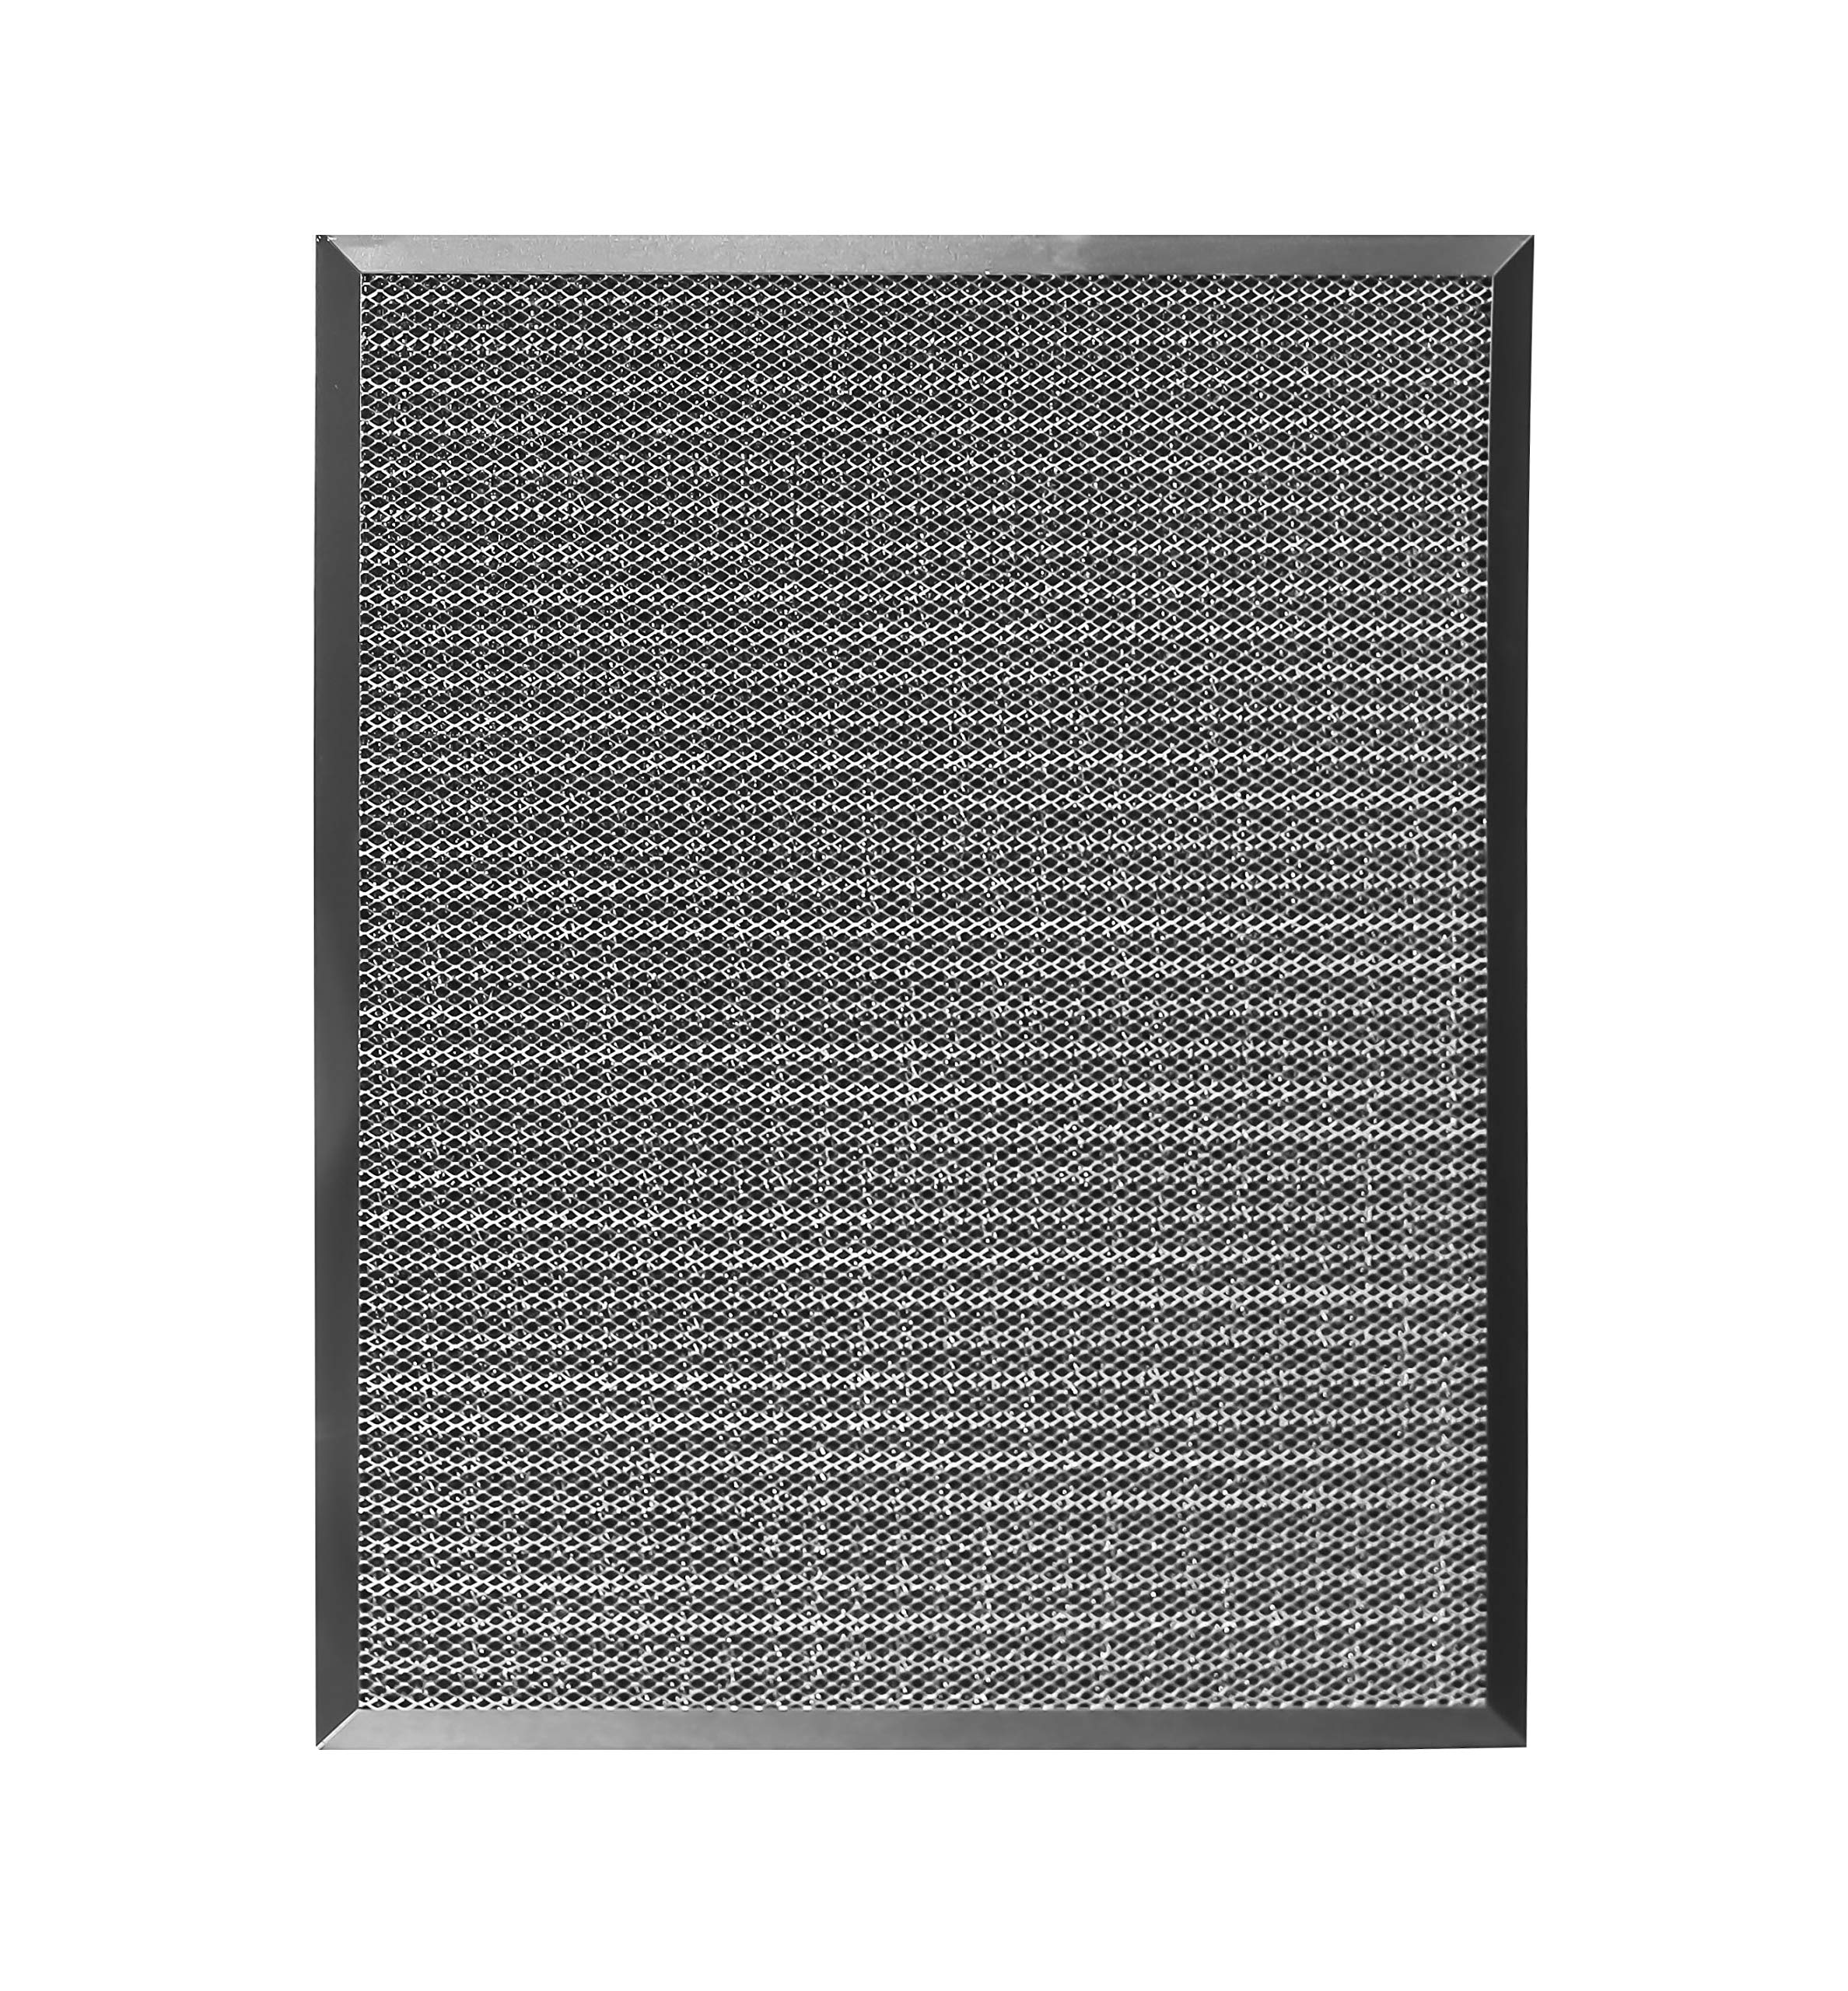 LifeSupplyUSA (20X24X1) Aluminum Electrostatic Air Filter Replacement Washable Reusable Ac Filter For Central Hvac Furnace - Improve Airflow &